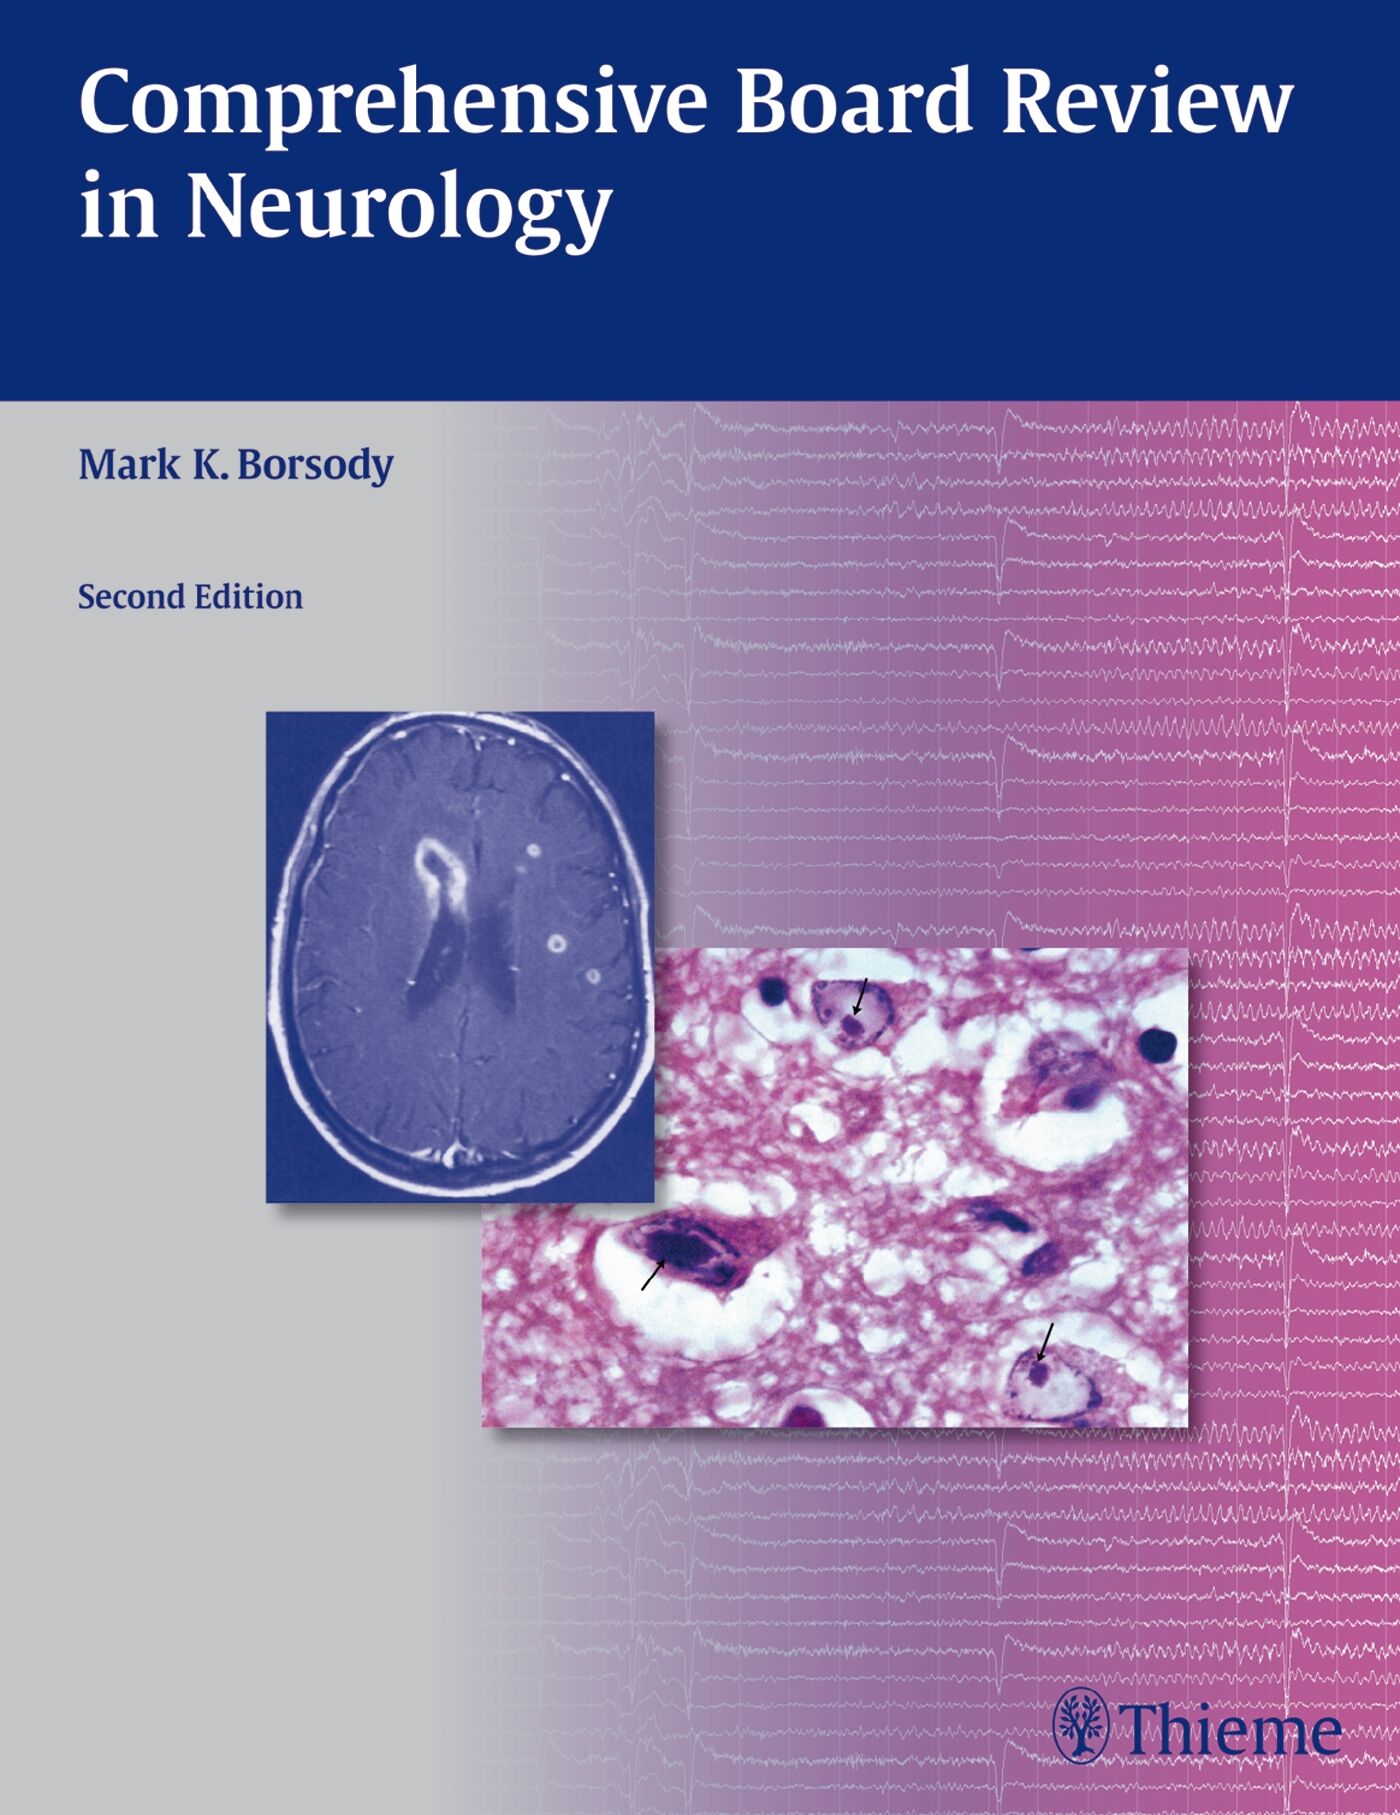 Comprehensive Board Review in Neurology, 9781604065930